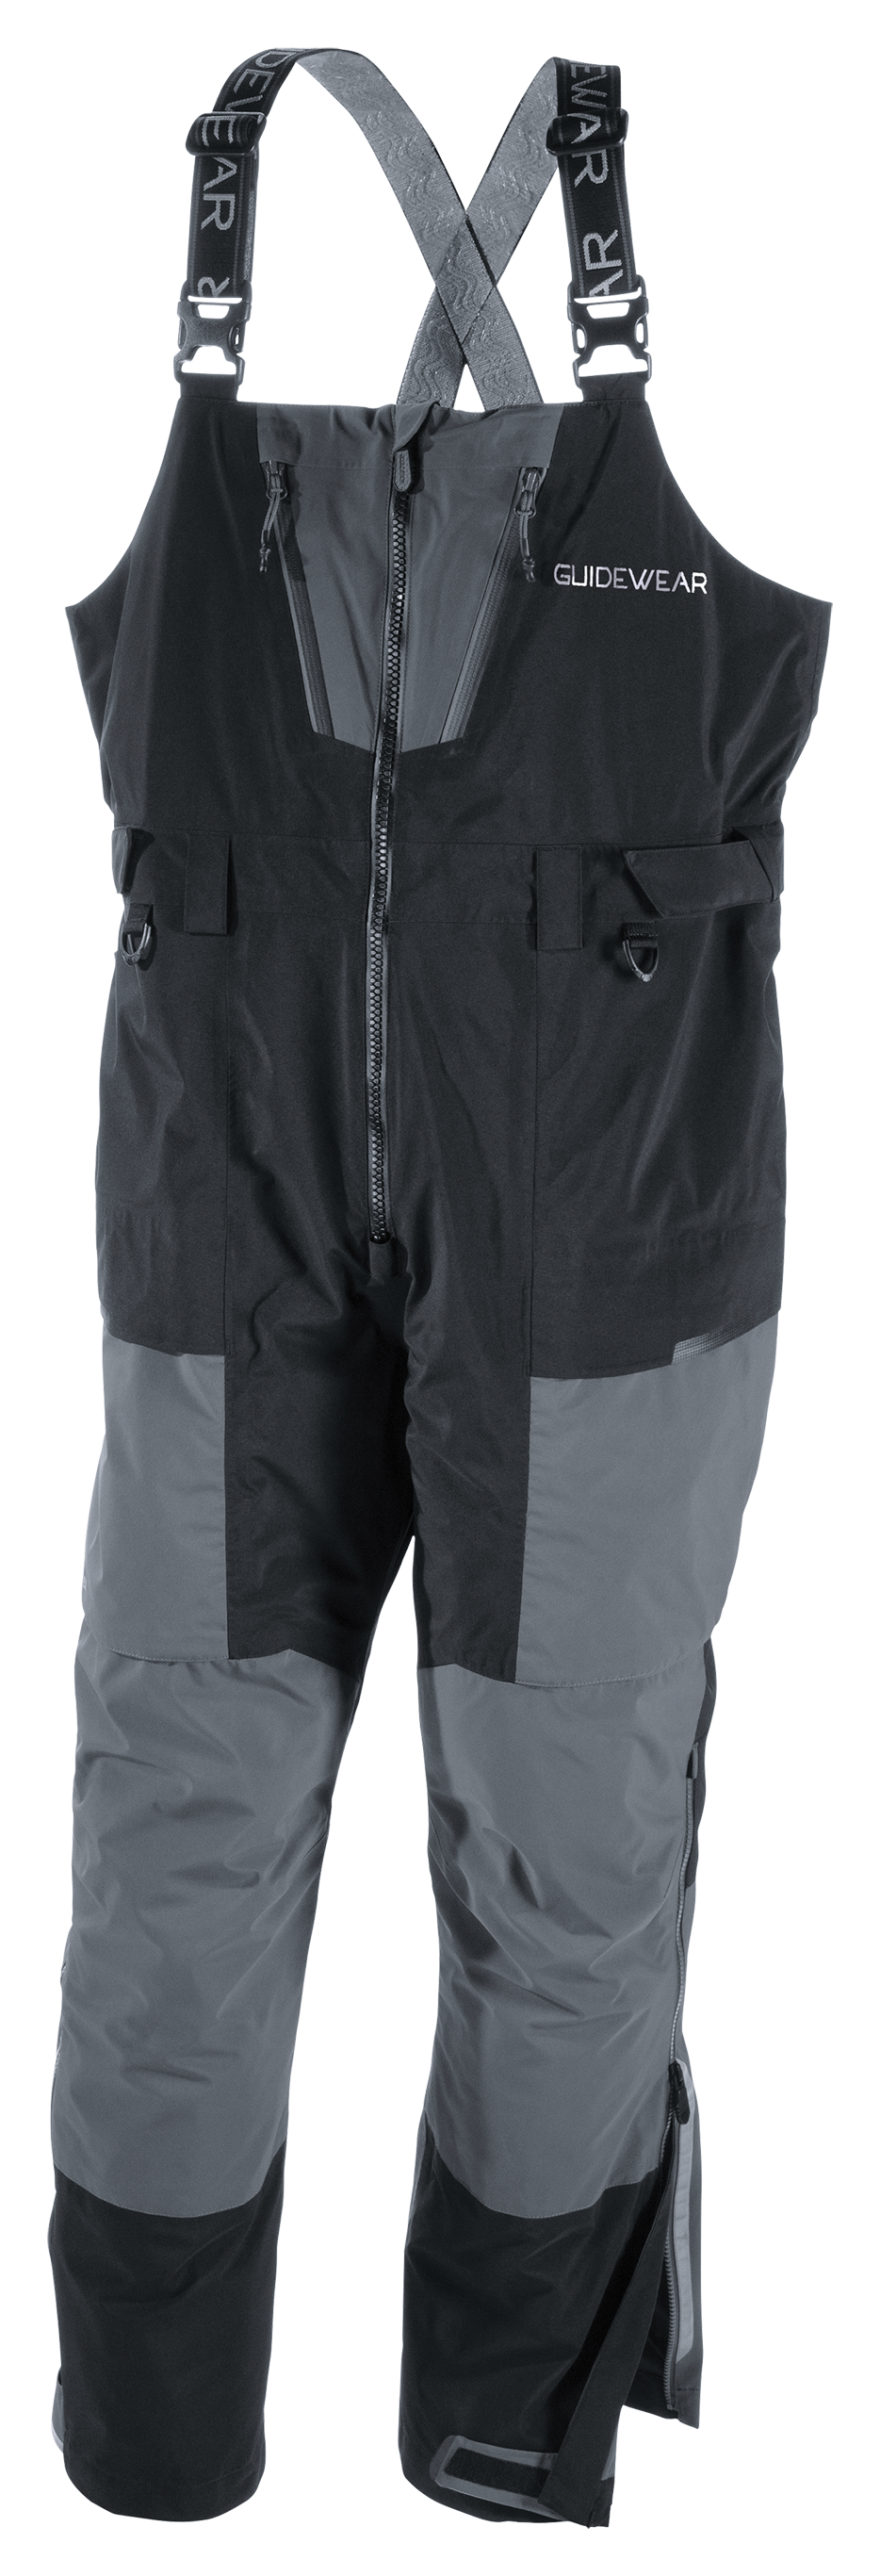 Johnny Morris Bass Pro Shops Guidewear Rainy River Jacket with GORE-TEX Paclite for Ladies - Balsam - M